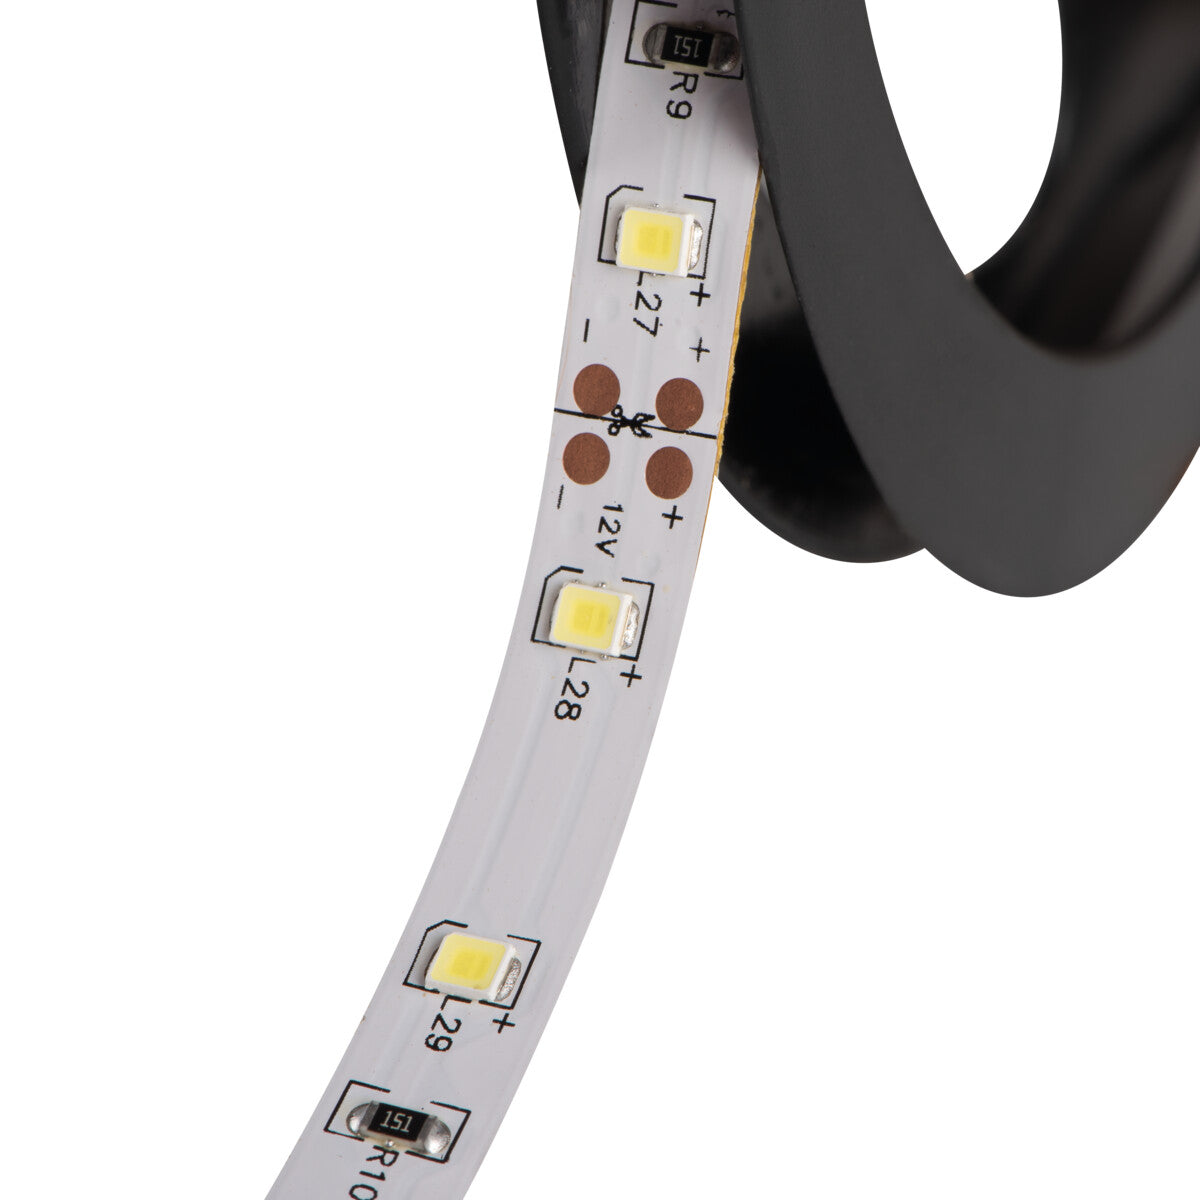 Kanlux 12V 4.8w/m 5meter IP00 8mm 24w White LED Striptape - IP00 Indoor - Choice of Warm WW Neutral NW Cool White CW